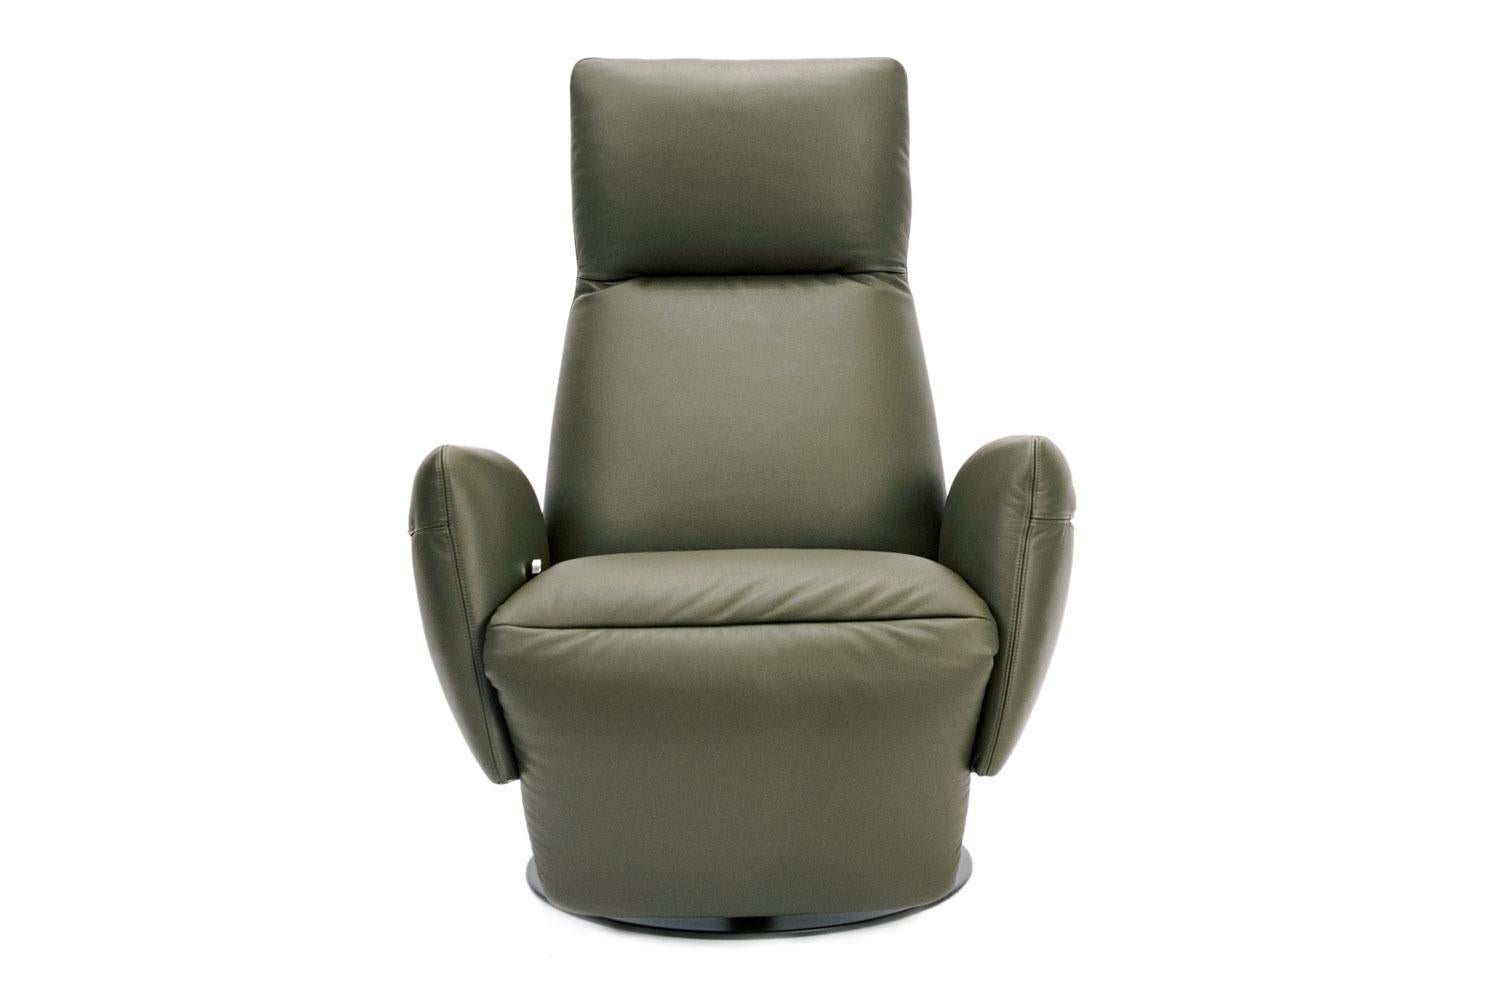 The pillow recliner by Poltrona Frau

The pillow armchair designed by Poltrona Frau R. & D. is the most complete aesthetic and functional expression of the reclinable seat. It is completely covered in soft olive green colored leather upholstery